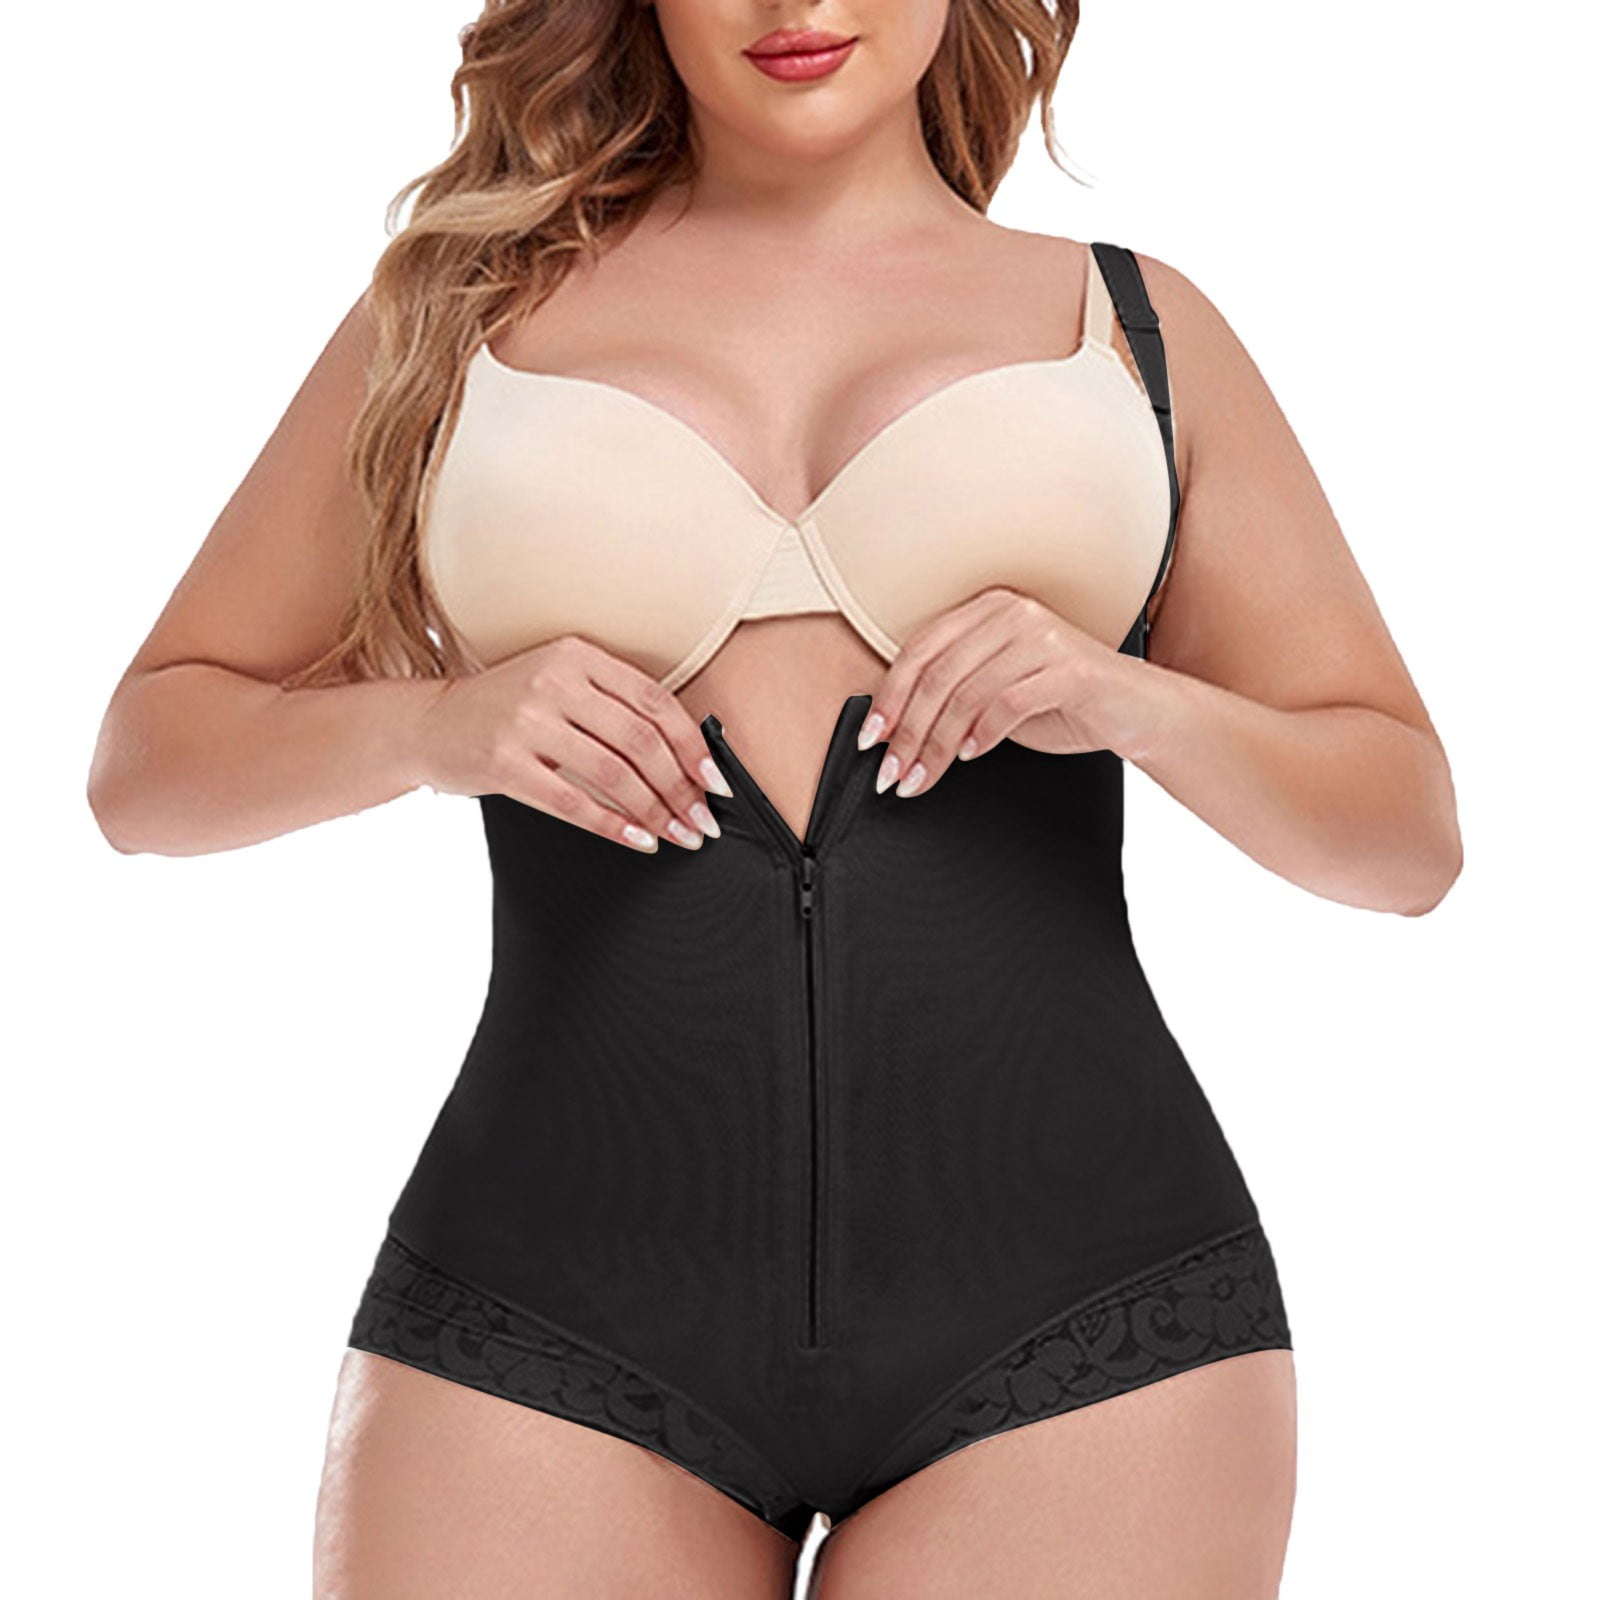 HIBRO High Compression Body Shaper Lace Colombian Fajas Shapewear Bodysuit Fajas  Reductoras De Latex Sleek And Lean Body Shaped Camisole Women Undergarments  for Stomach Control Sweat Band Waist 